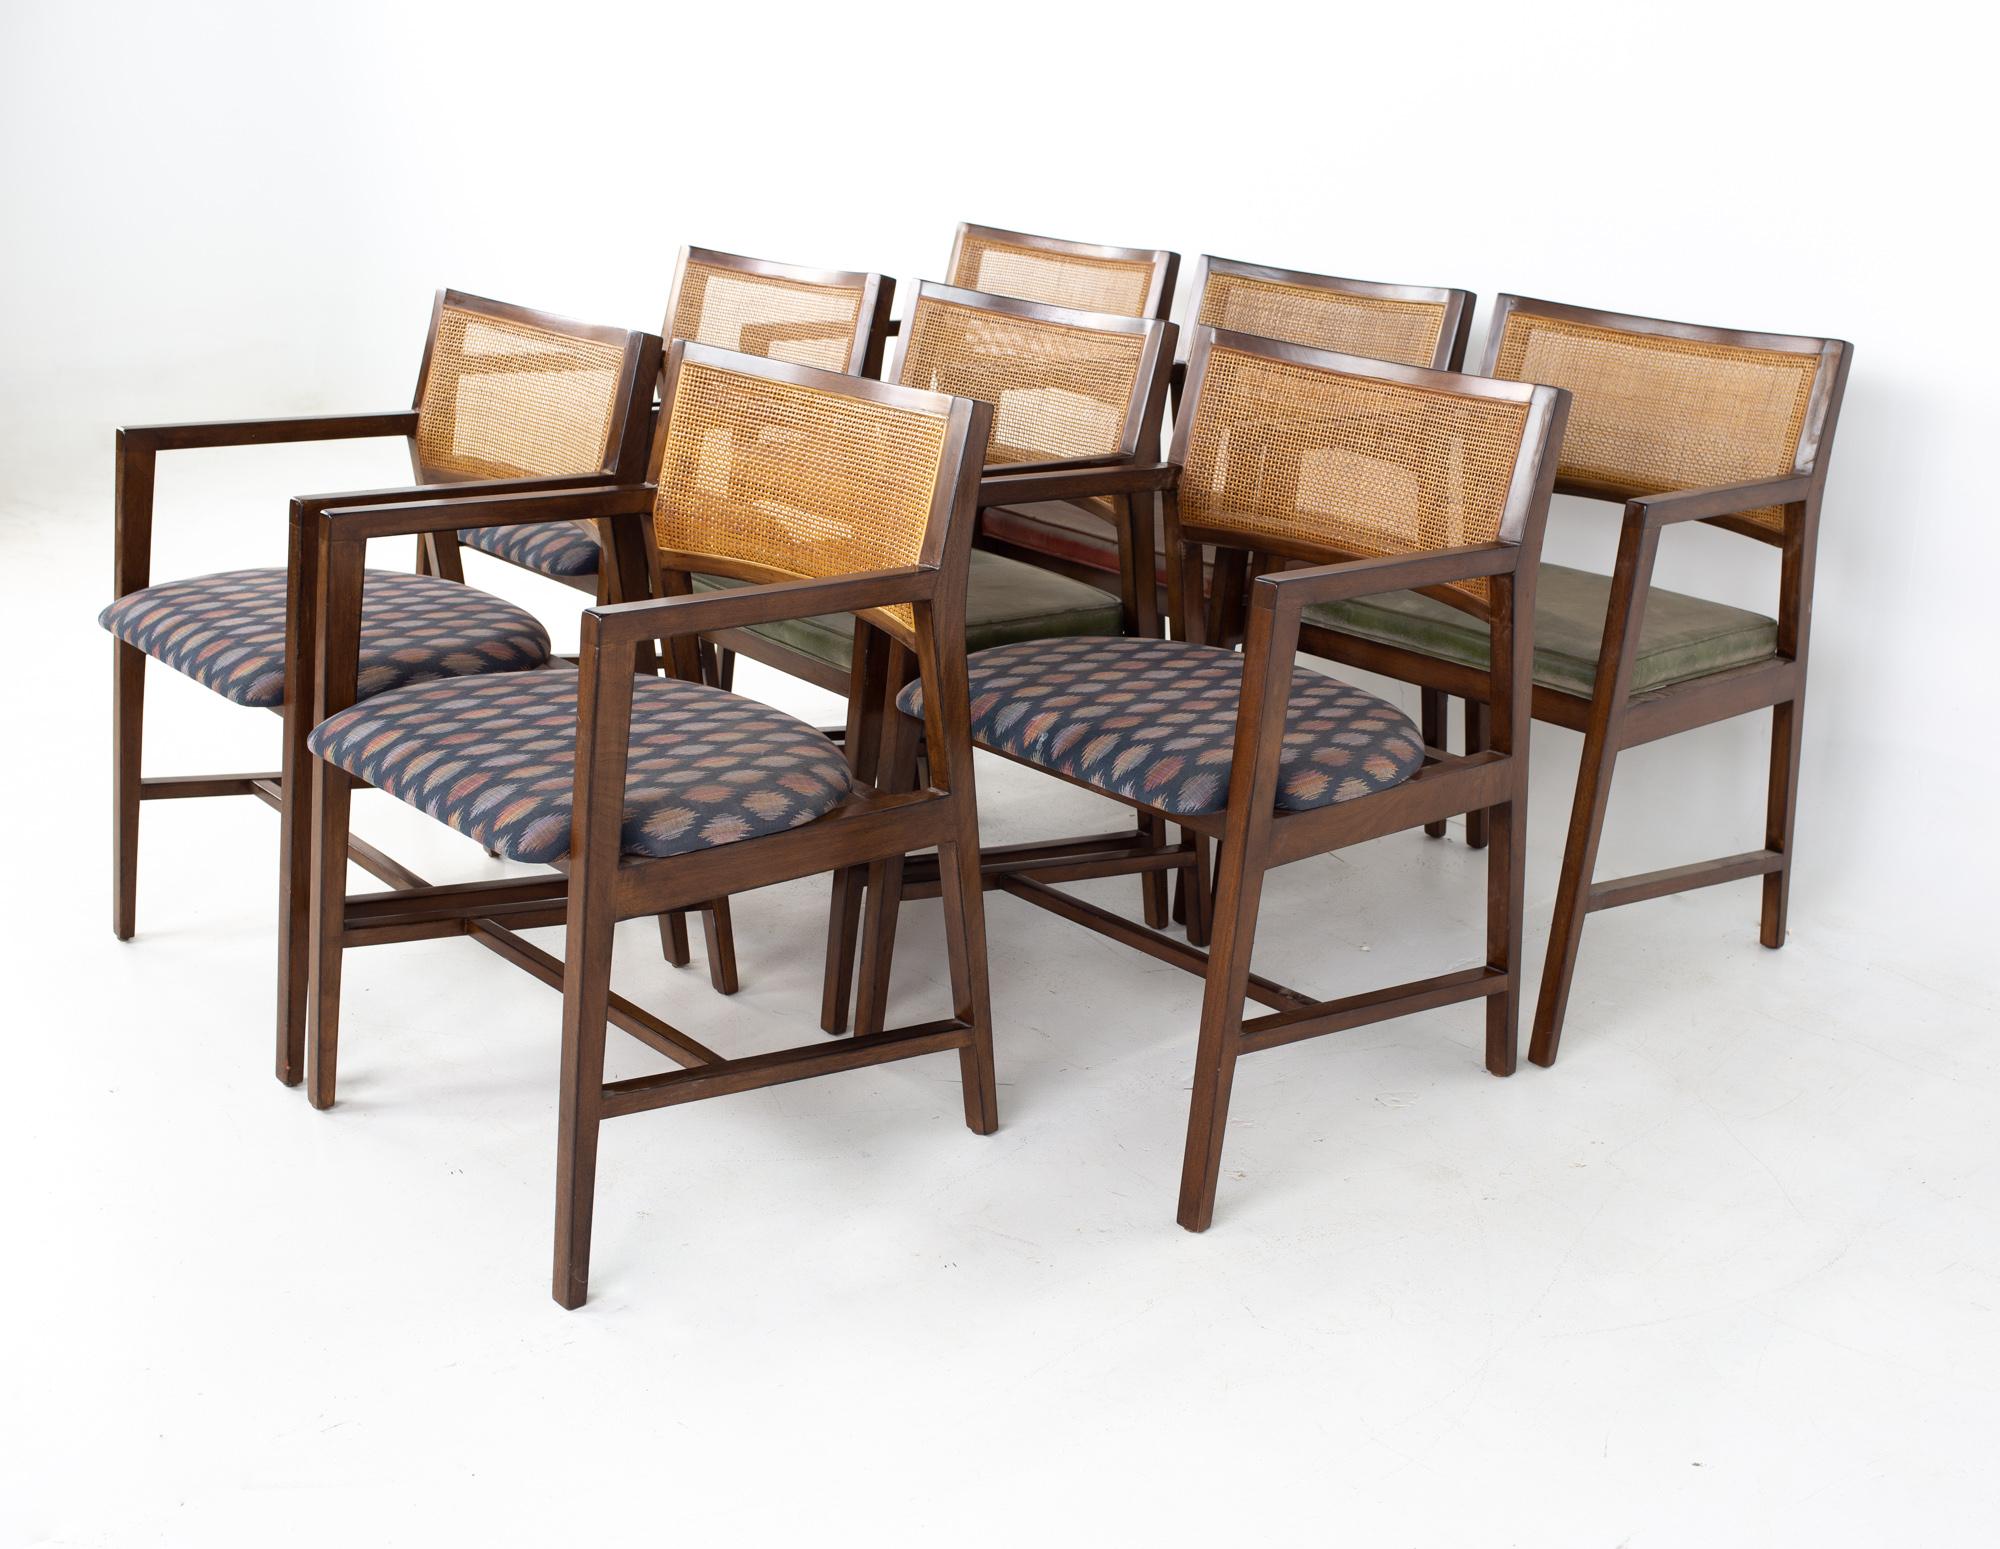 Dunbar Mid Century dining chairs, set of 8
Each chair measures: 21 wide x 20 deep x 31 high, with a seat height of 18 inches

All pieces of furniture can be had in what we call restored vintage condition. That means the piece is restored upon